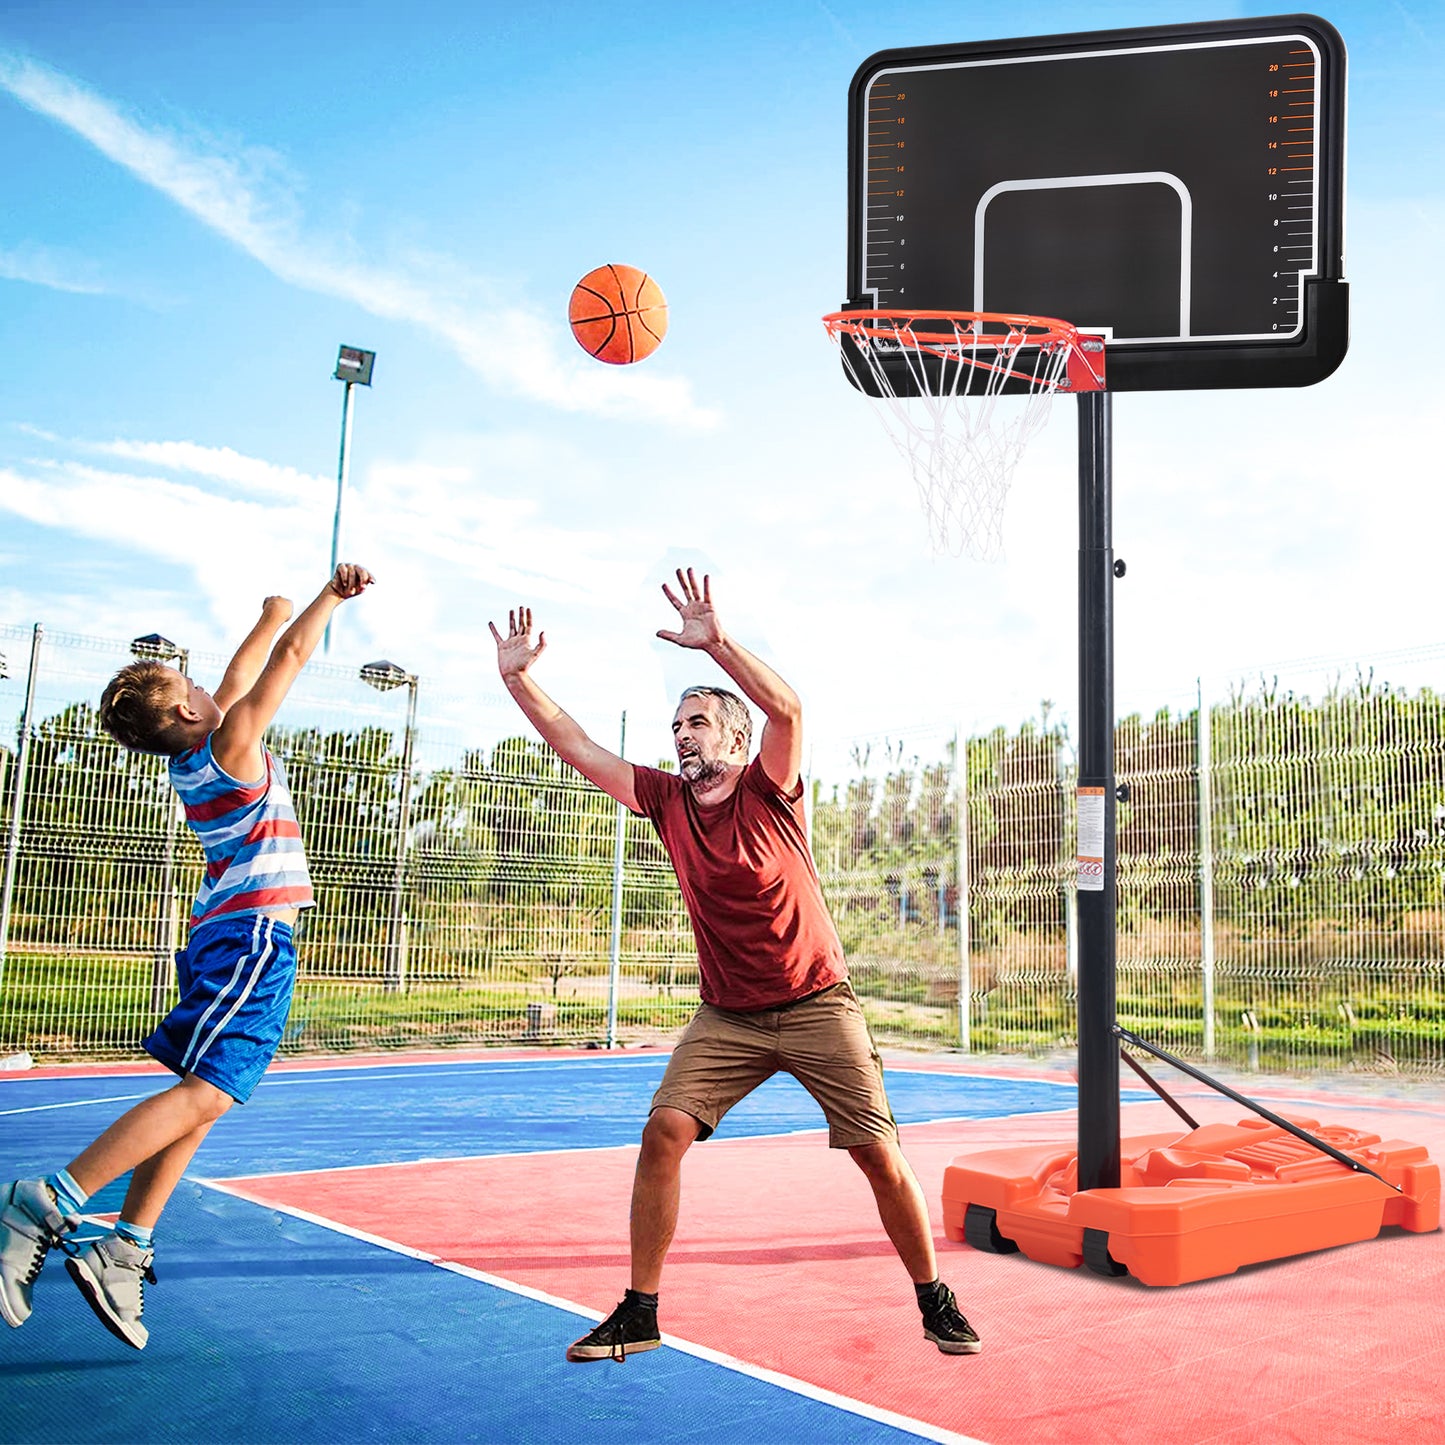 Portable Basketball Hoop & Goal with Vertical Jump Measurement, Outdoor Basketball System with 6.6-10ft Height Adjustment for Youth, Adults